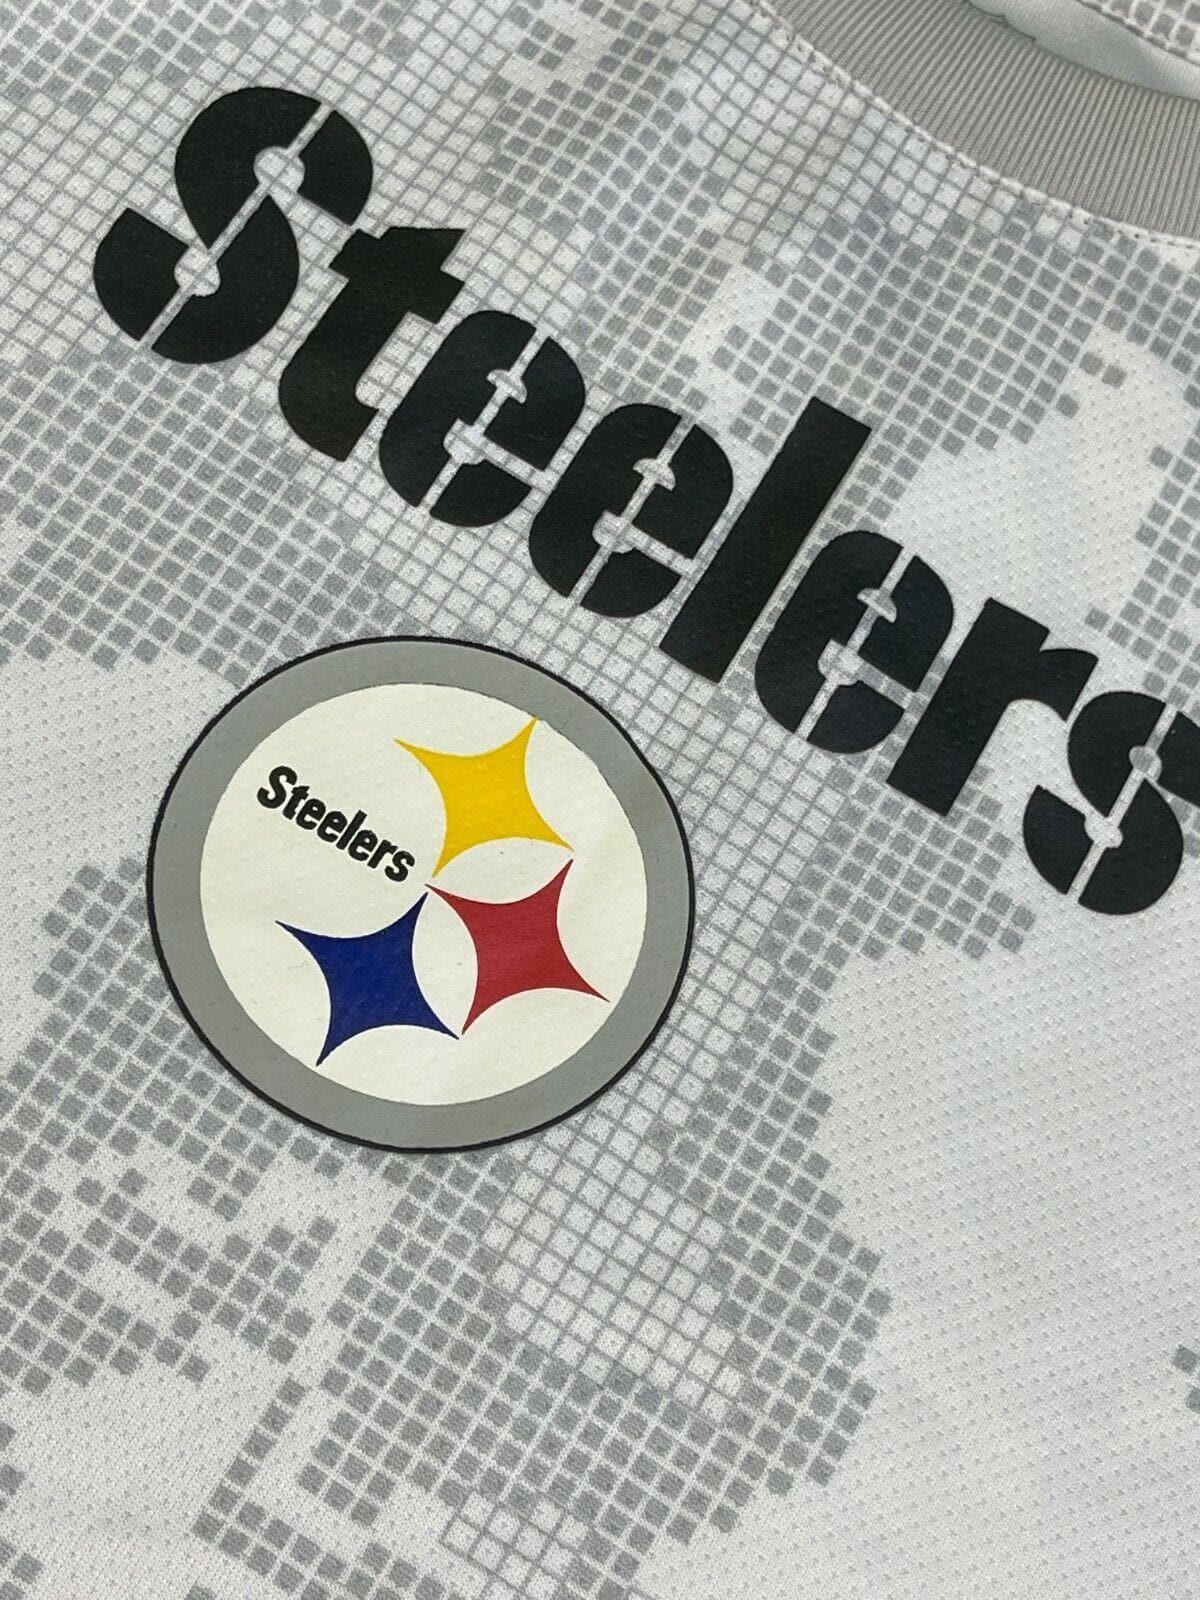 NFL Pittsburgh Steelers Wicking T-Shirt Grey Toddler 3T Chest 26"